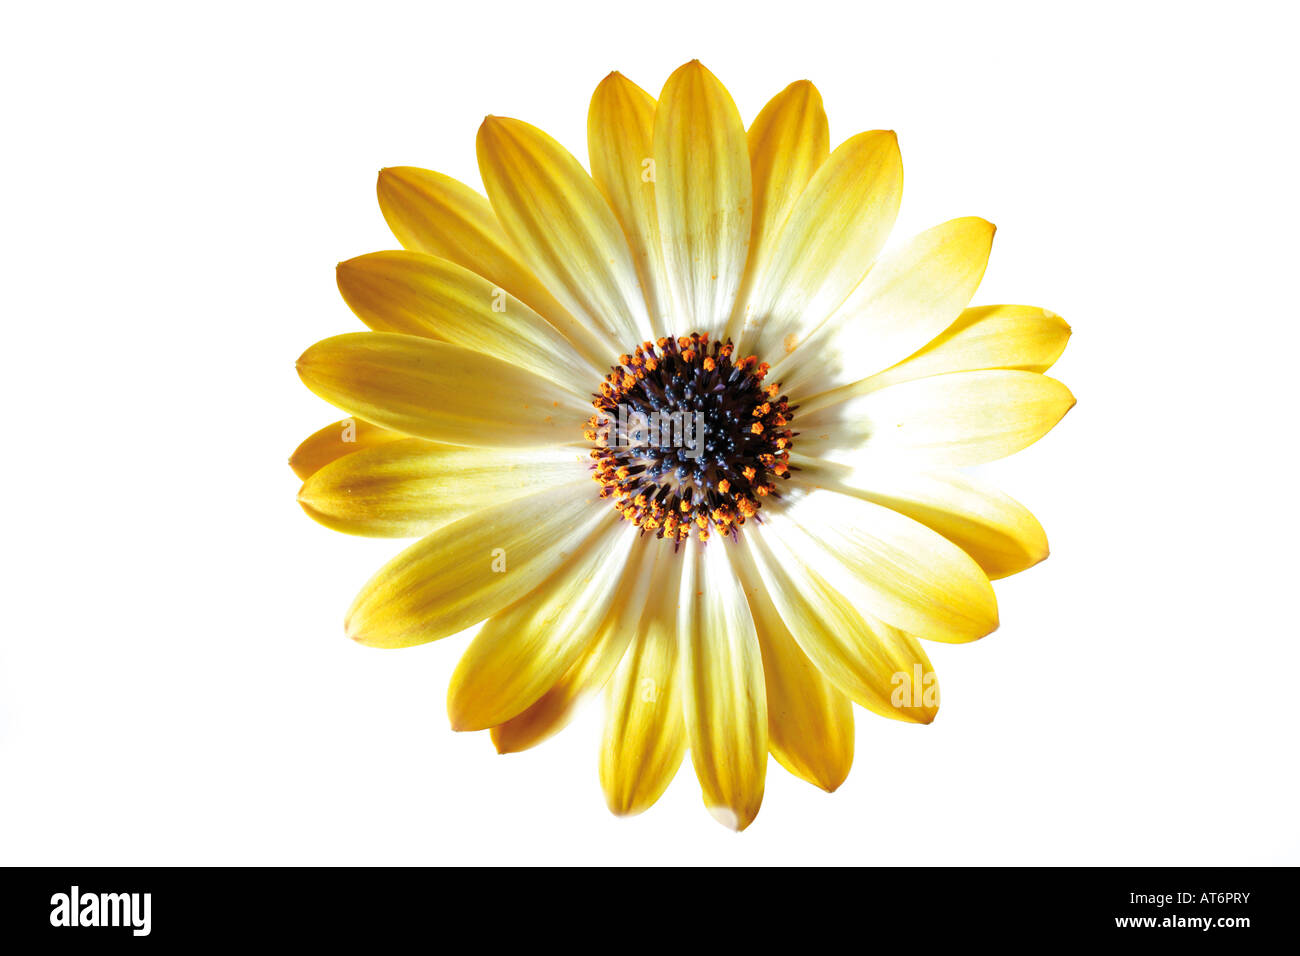 African daisy flower, (barberiae Osteospermum), close-up Banque D'Images